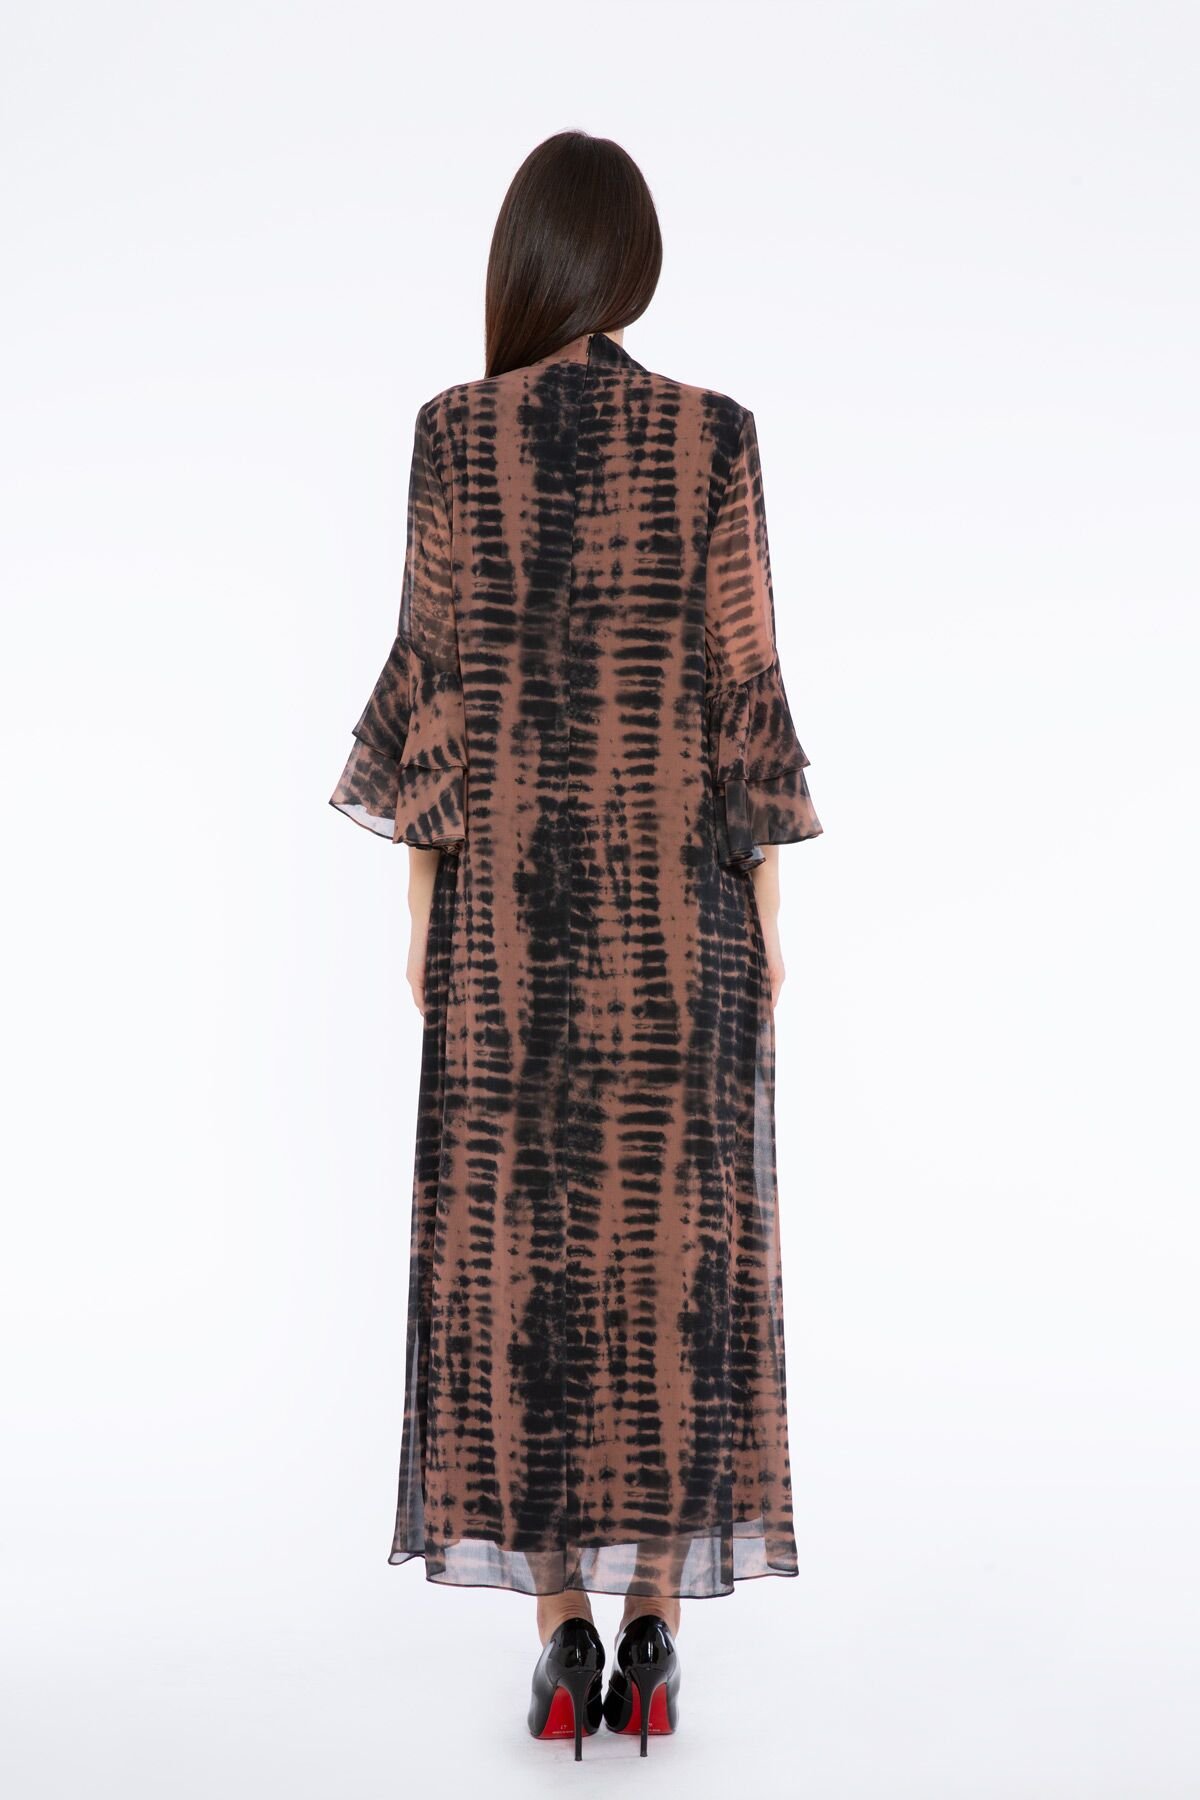 Collar Stone Embroidered Tie Dye Patterned Long Brown Dress